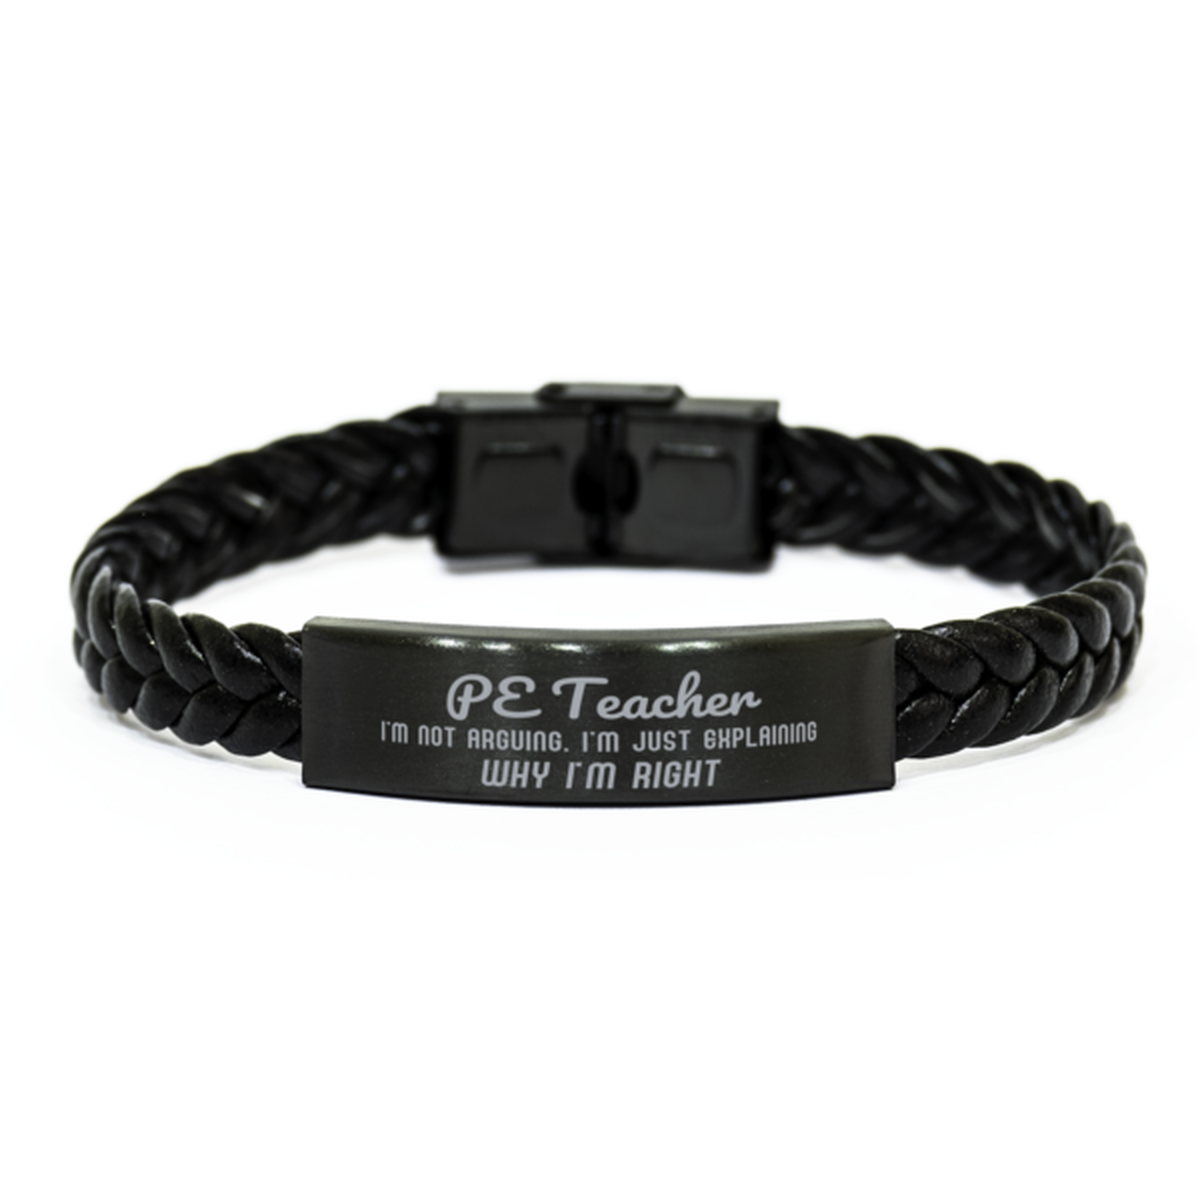 PE Teacher I'm not Arguing. I'm Just Explaining Why I'm RIGHT Braided Leather Bracelet, Graduation Birthday Christmas PE Teacher Gifts For PE Teacher Funny Saying Quote Present for Men Women Coworker